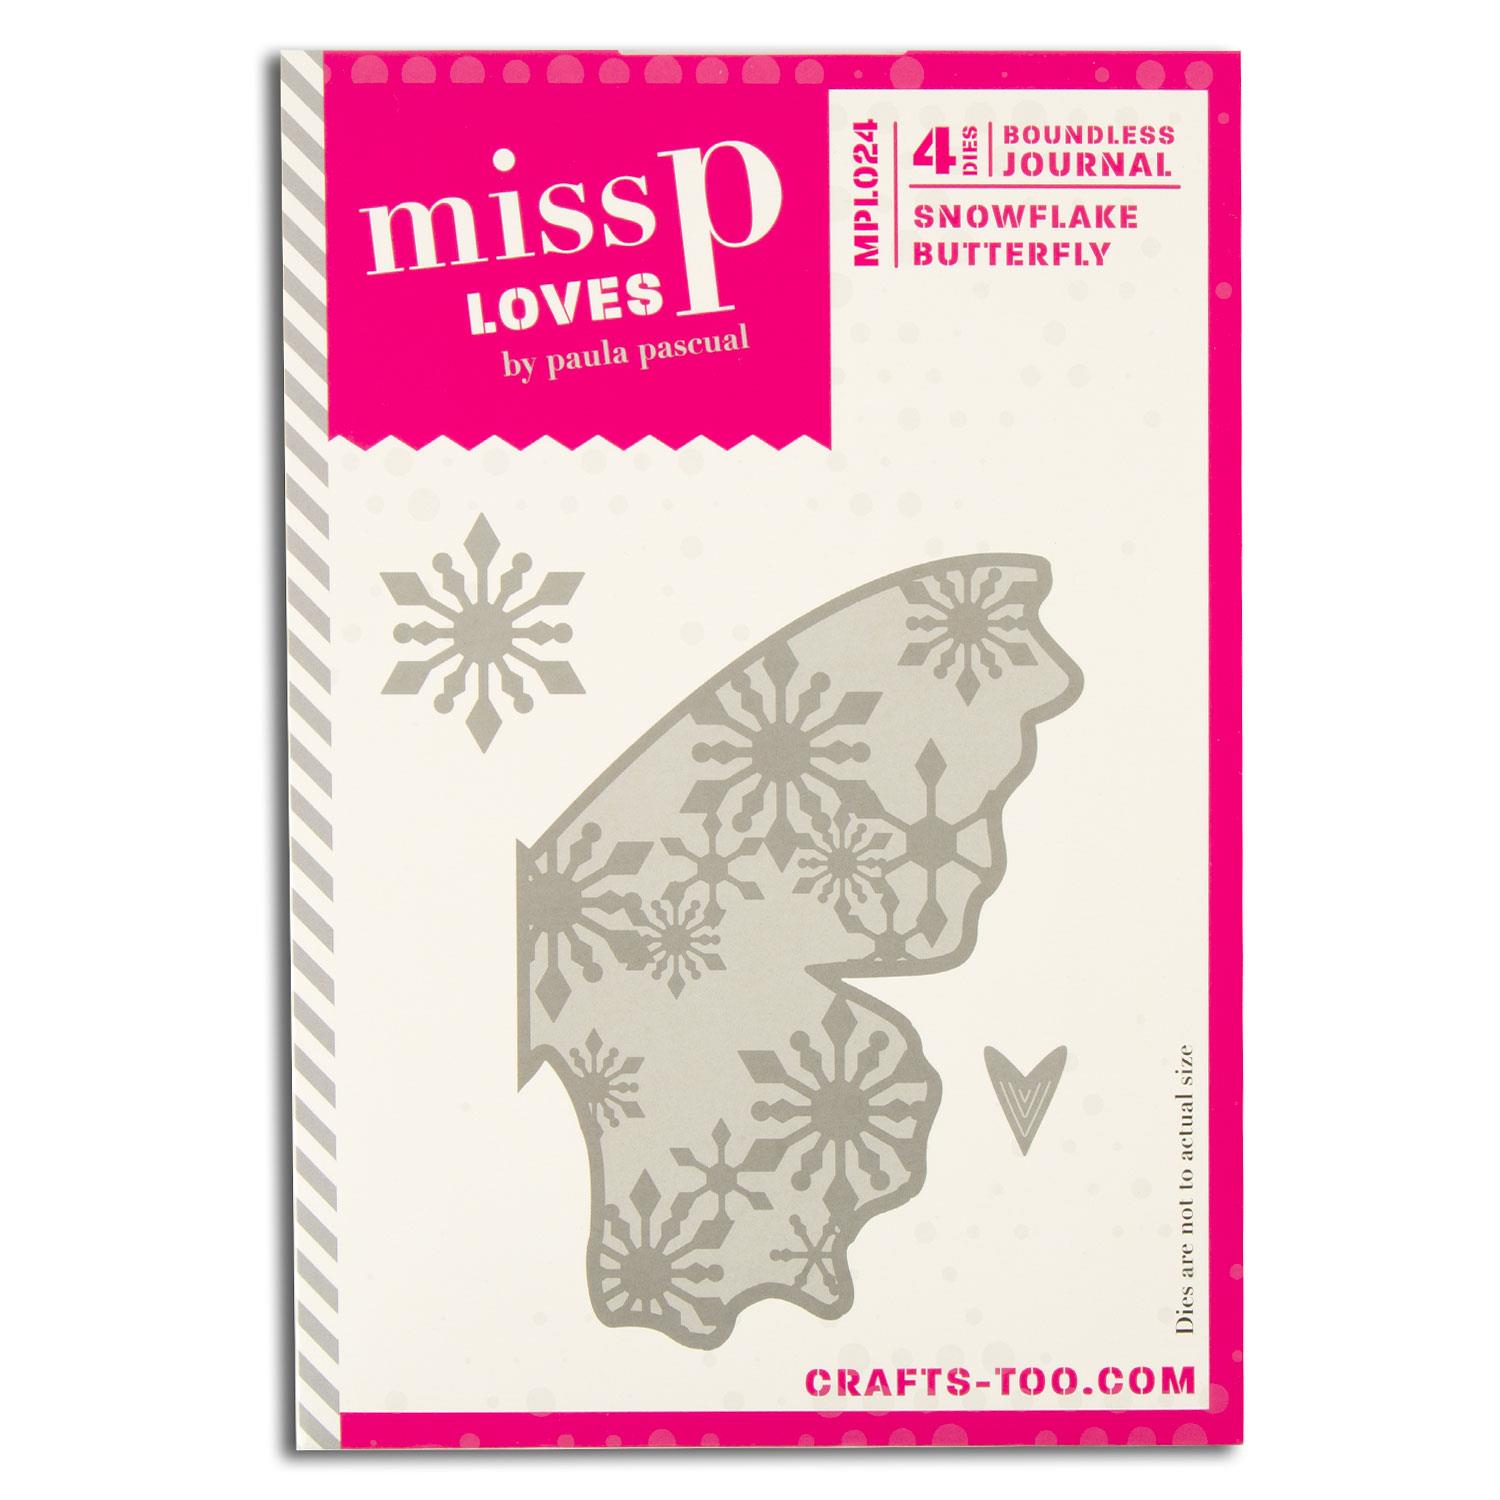 Miss P Loves Boundless Journal - Snowflake Butterfly (4pcs)